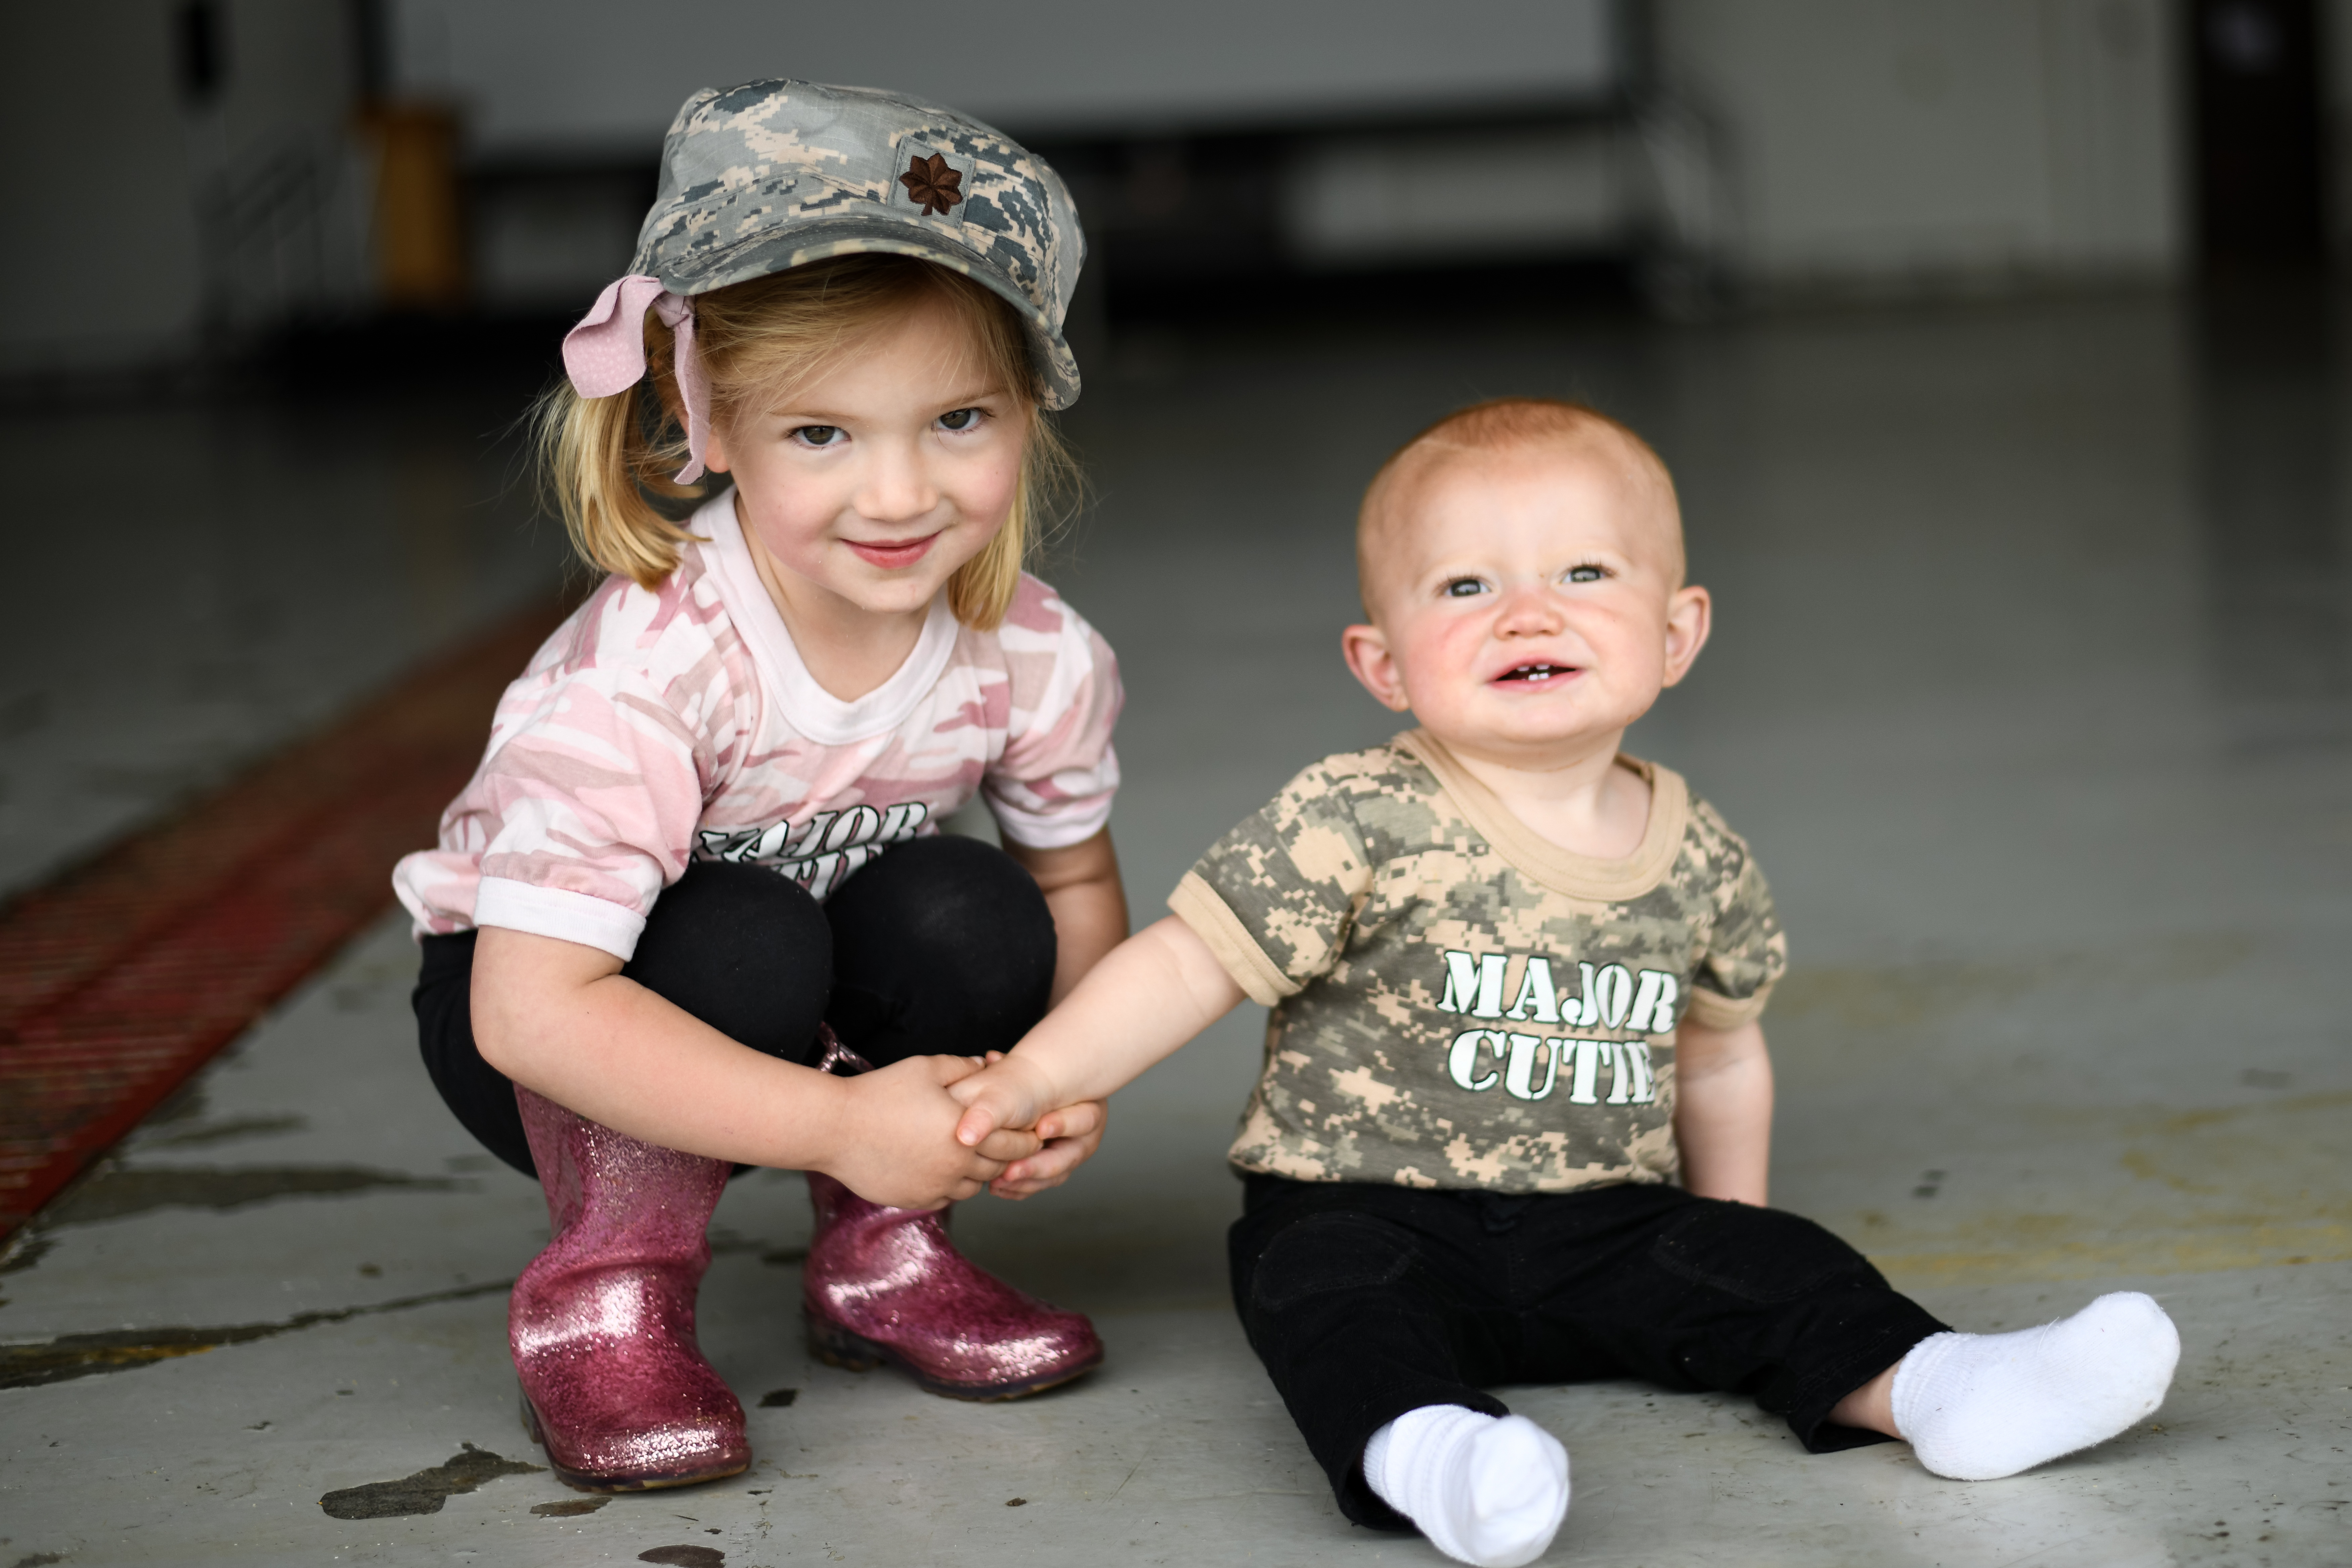 Claire and Eli Eaton, the children of 178th Wing member Maj. Zachary Eaton, exemplify the Month of the Military Child at Springfield-Beckley Air National Guard Base in Springfield, Ohio, April 25, 2019. April is designated as Month of the Military Child to honor and celebrate service members' children. (U.S. Air National Guard photo by Staff Sgt. Rachel Simones)